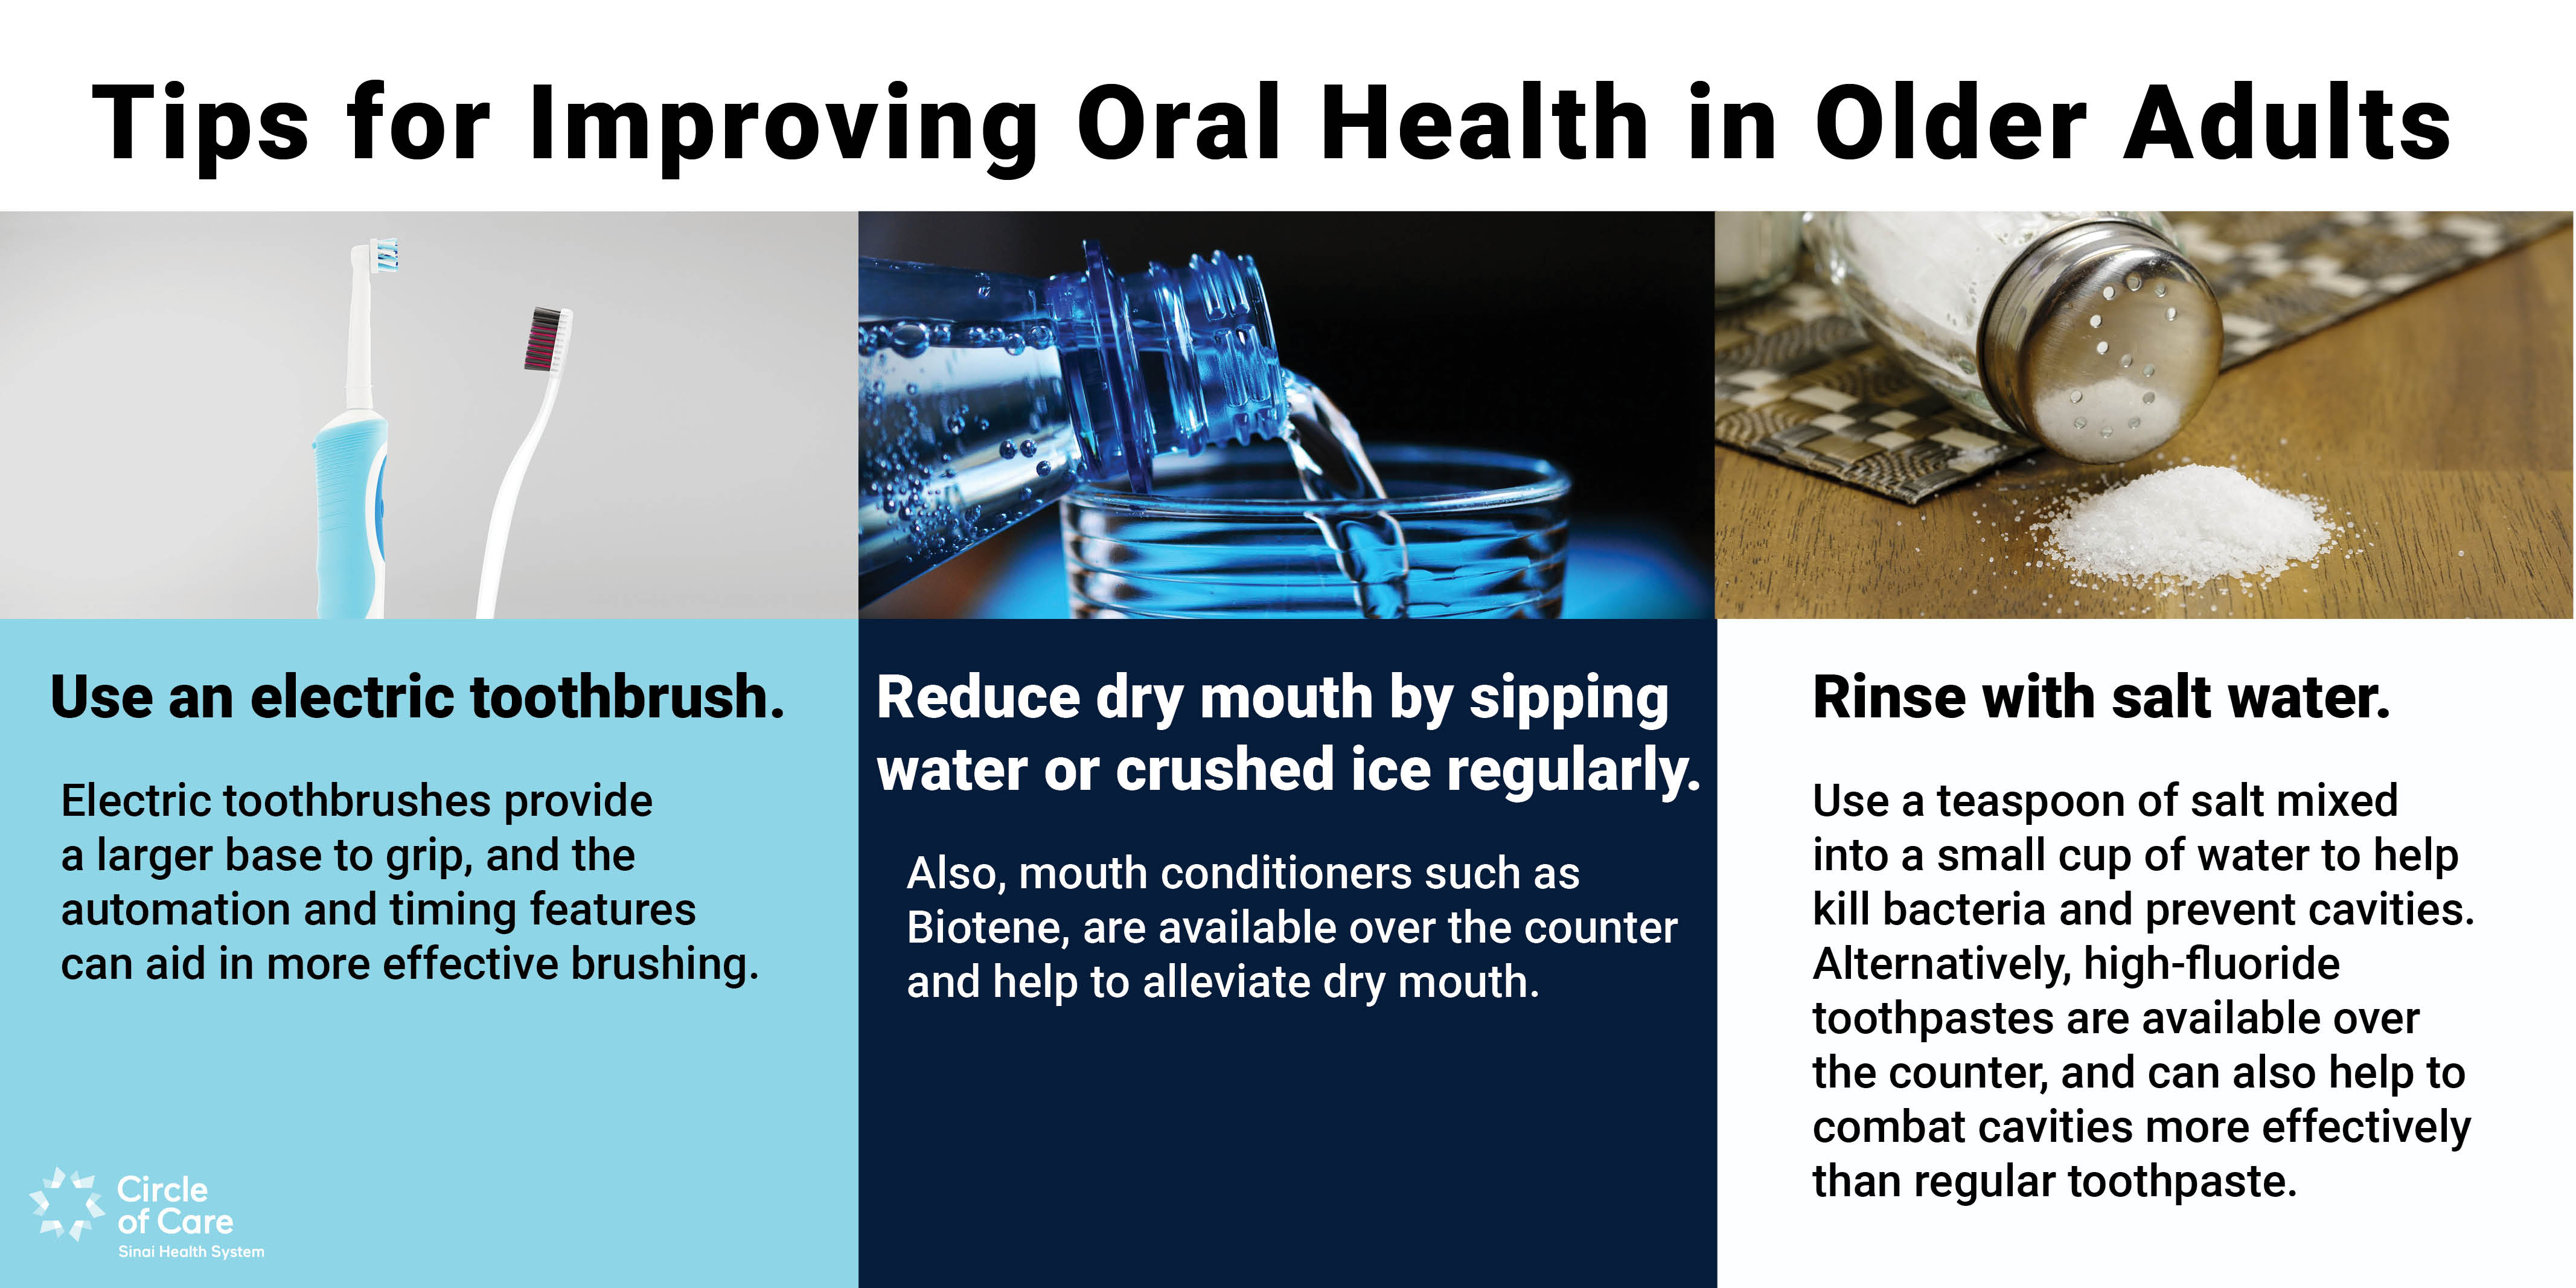 Tips for Improving Oral Health in Older Adults